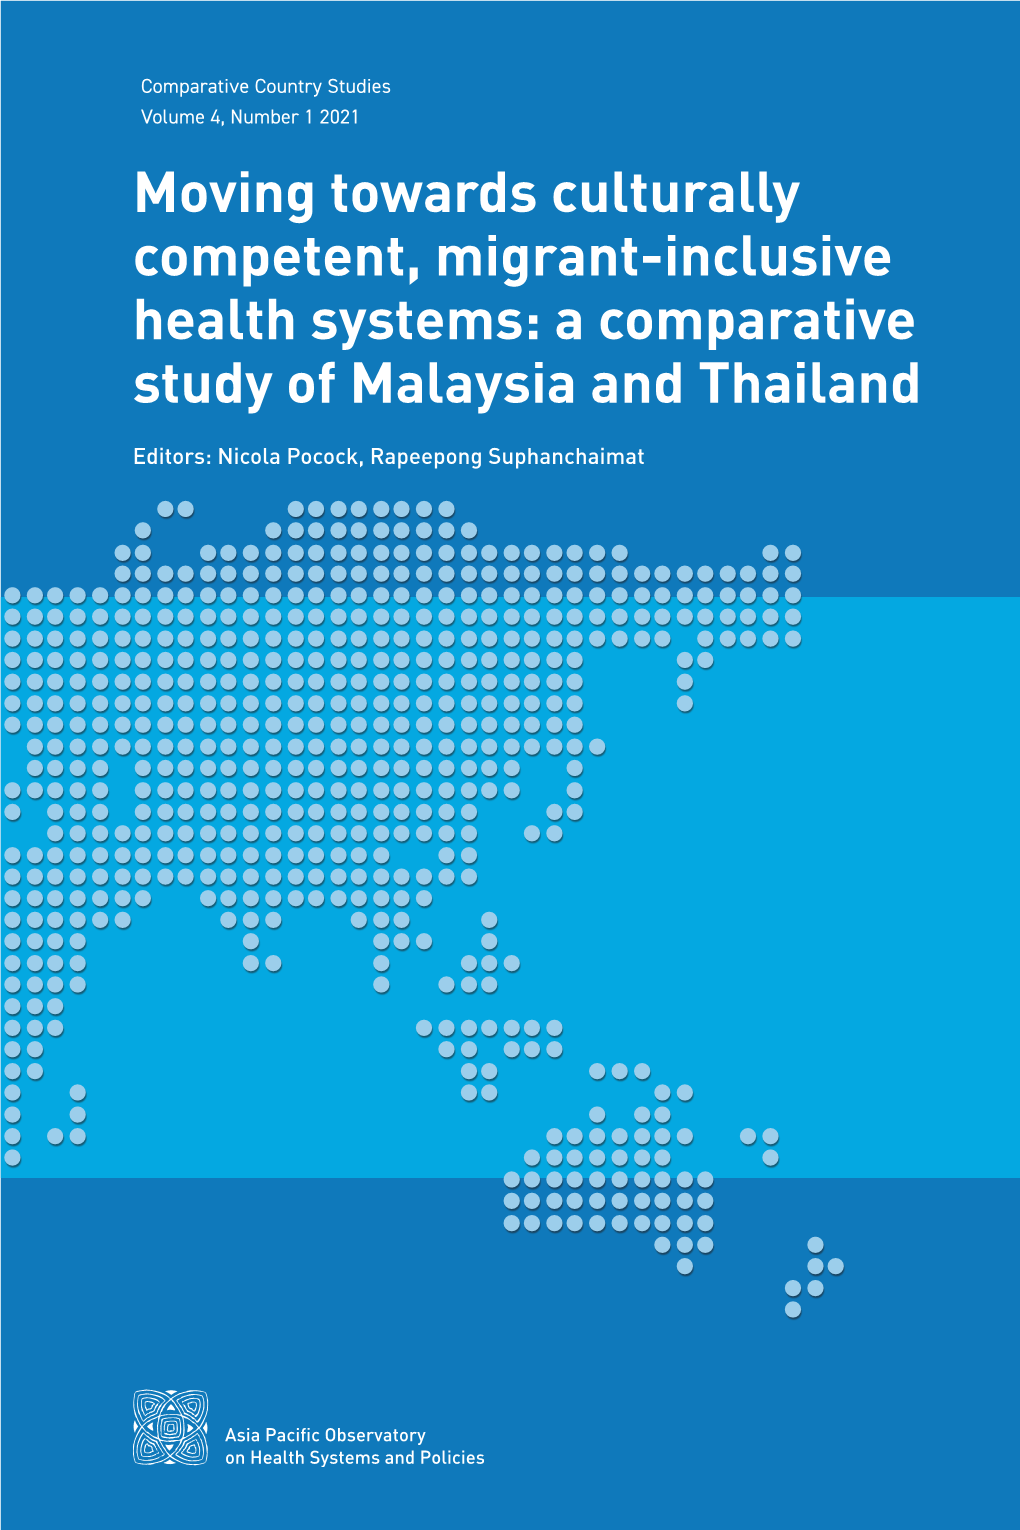 Moving Towards Culturally Competent, Migrant-Inclusive Health Systems: a Comparative Study of Malaysia and Thailand